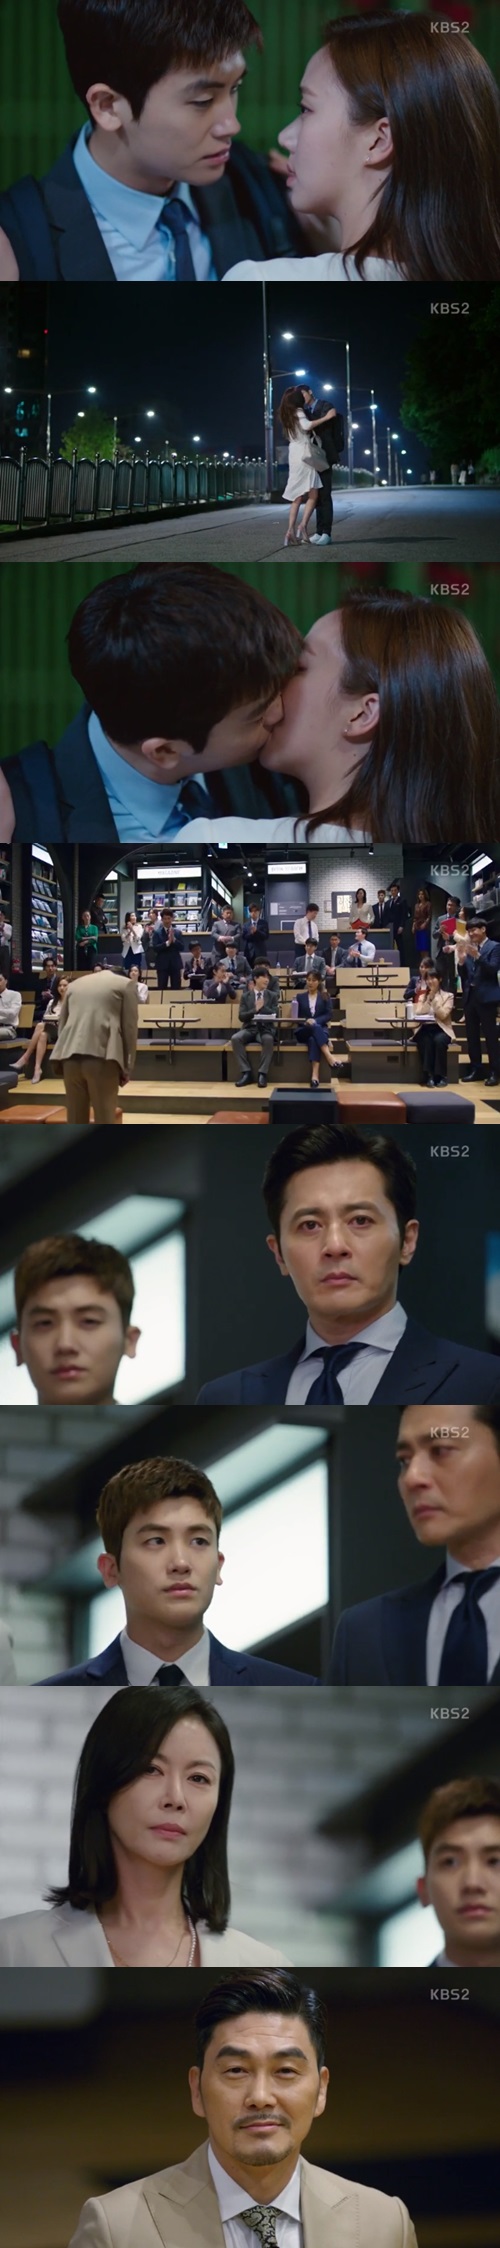 Park Hyung-sik and Ko Sung-hee kissed, and Kim Yeong-hos Come back boosted tension.In the 11th KBS 2TV drama Suits (played by Kim Jung-min/directed by Kim Jin-woo), which aired on May 30, Ham Yeong-ho backed the Come.Kang Ha-yeon (Jin Hee-kyung) was nervous about the news that Hams wife was dead, guessing Hams Come back.The past history that was revealed with him was that Ham was threatening to kill Kang Hae-yeon with a weapon.Kang Ha-yeon and Miniforce Seok (Jang Dong-gun) then visited the funeral home of Ham Dae-pyos wife and revealed the past history left by the conversation between the two.Kang Hae-yeon tried to push the fleet vote because of embezzlement fraud, but Ham did not budge.However, after Kang Hae-yeon told his wife that he would inform his wife of the affair, he was angry to kill Kang Hae-yeon.Since then, Ham has left the law firm, but his weakness has disappeared due to his wifes death.Miniforce Seok proposed to Kang Ha-yeon to hire Kim Moon-hee (Son Young-eun) as a condition to prevent Hams Come back.Miniforce went to the fleet table and told Blackmail – Cinémix Par Chloé – to expose his daughter to an affair instead of his wife, and hired Kim Moon-hee.Kim Moon-hee was hired by Miniforce Seok Asso Ko Yeon-woo (Park Hyung-sik) for the weakness of being a fake lawyer.Kim Moon-hee asked Miniforce for the reason for hiring Ko Yeon-woo, but Miniforce did not answer, and instead he caught Kim Moon-hees brothers assault and blocked Kim Moon-hees mouth.In the meantime, Ko Yeon-woo filed a copyright lawsuit claiming that the best-selling novel was plagiarized.Ko Yeon-woo was a representative of the publisher, but soon found out that the publisher Hong Dae-pyo intercepted the synopsis idea of ​​aspiring writer Lee Jung-yeon.There was no problem with the contract, but if the word comes out, it is bad for the strongness that is in the process of merger and acquisition of the publisher.Ko Yeon-woo persuaded Hong to pay Lee Jung-yeon a 50 million won settlement, but Lee Jung-yeon refused.Lee Jung-yeon was angry that the lawyer doesnt know what Ive been taken away, and Ko Yeon-woo found out that Lee Jung-yeon not only lost his idea to Hong, but was raped with the help of Kim Ji-na (Ko Sung-hee).Ko Yeon-woo made Lee Jung-yeon proceed with the rape case through another lawyer, and Kim Ji-na was promoted as his agent, so that Hong Dae-pyo not only paid 50 million won in settlement but also raised Lee Jung-yeons name in the original bill.Lee Jung-yeon embraced Kim Ji-na and said, Thank you lawyer, I am a wonderful lawyer in the world. Kim Ji-na, who did not become a lawyer because of the test depression, got courage.Yoo Gyeong-sang